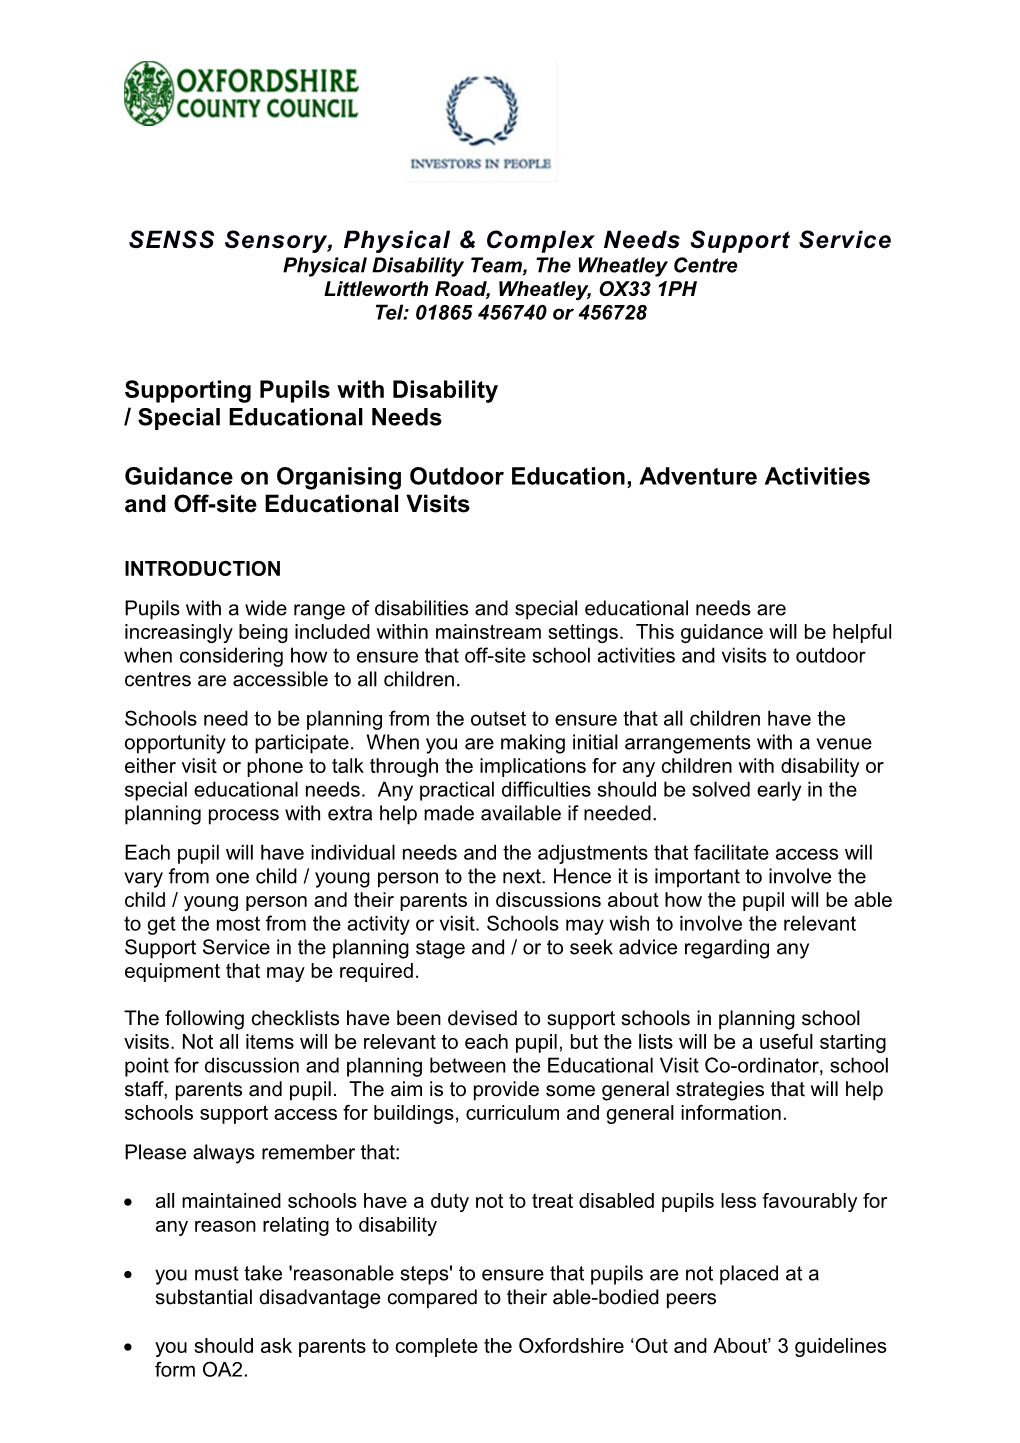 Supporting Pupils with Disability